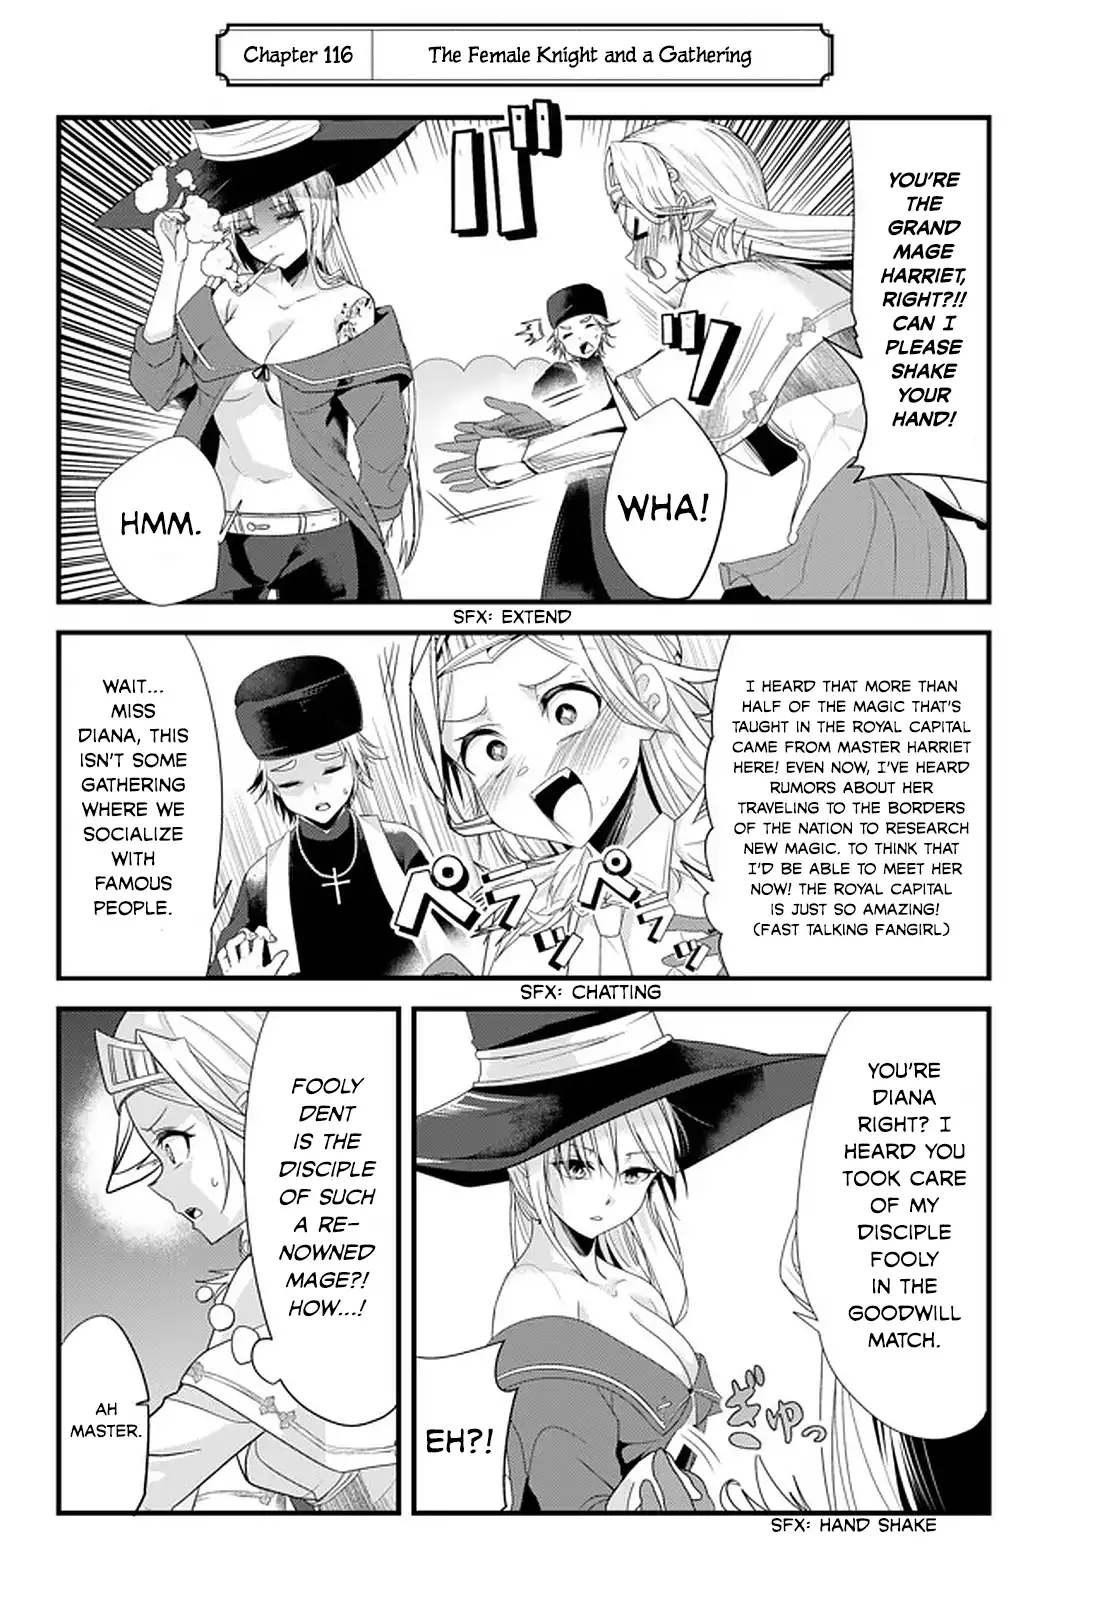 A Story About Treating a Female Knight, Who Has Never Been Treated as a Woman, as a Woman - Chapter 116 Page 2